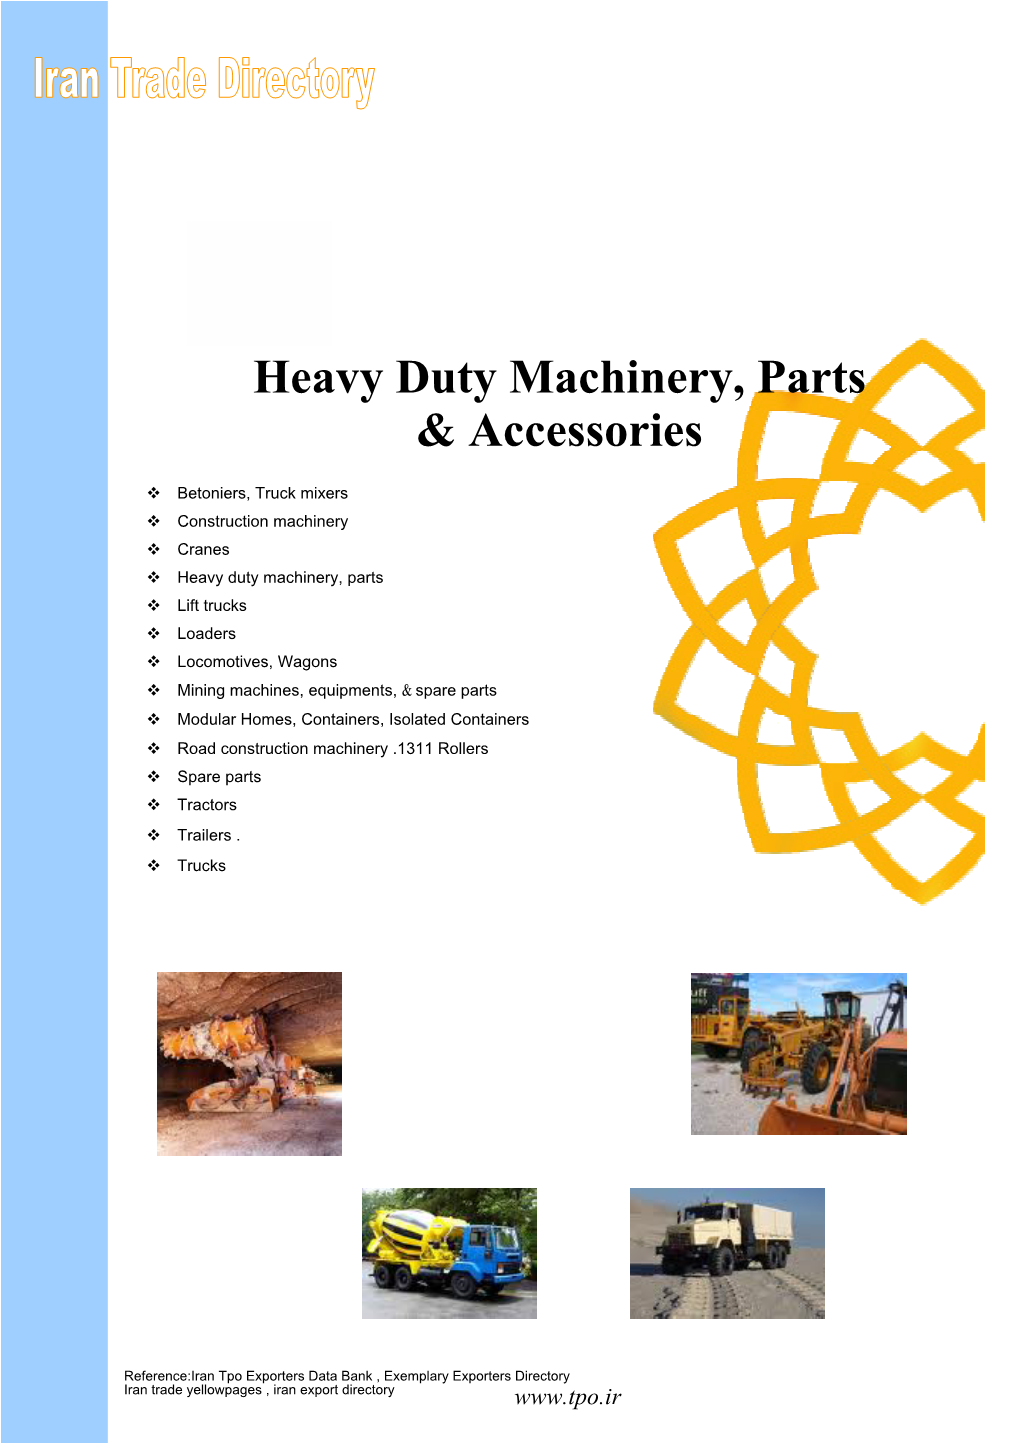 Heavy Duty Machinery, Parts & Accessories